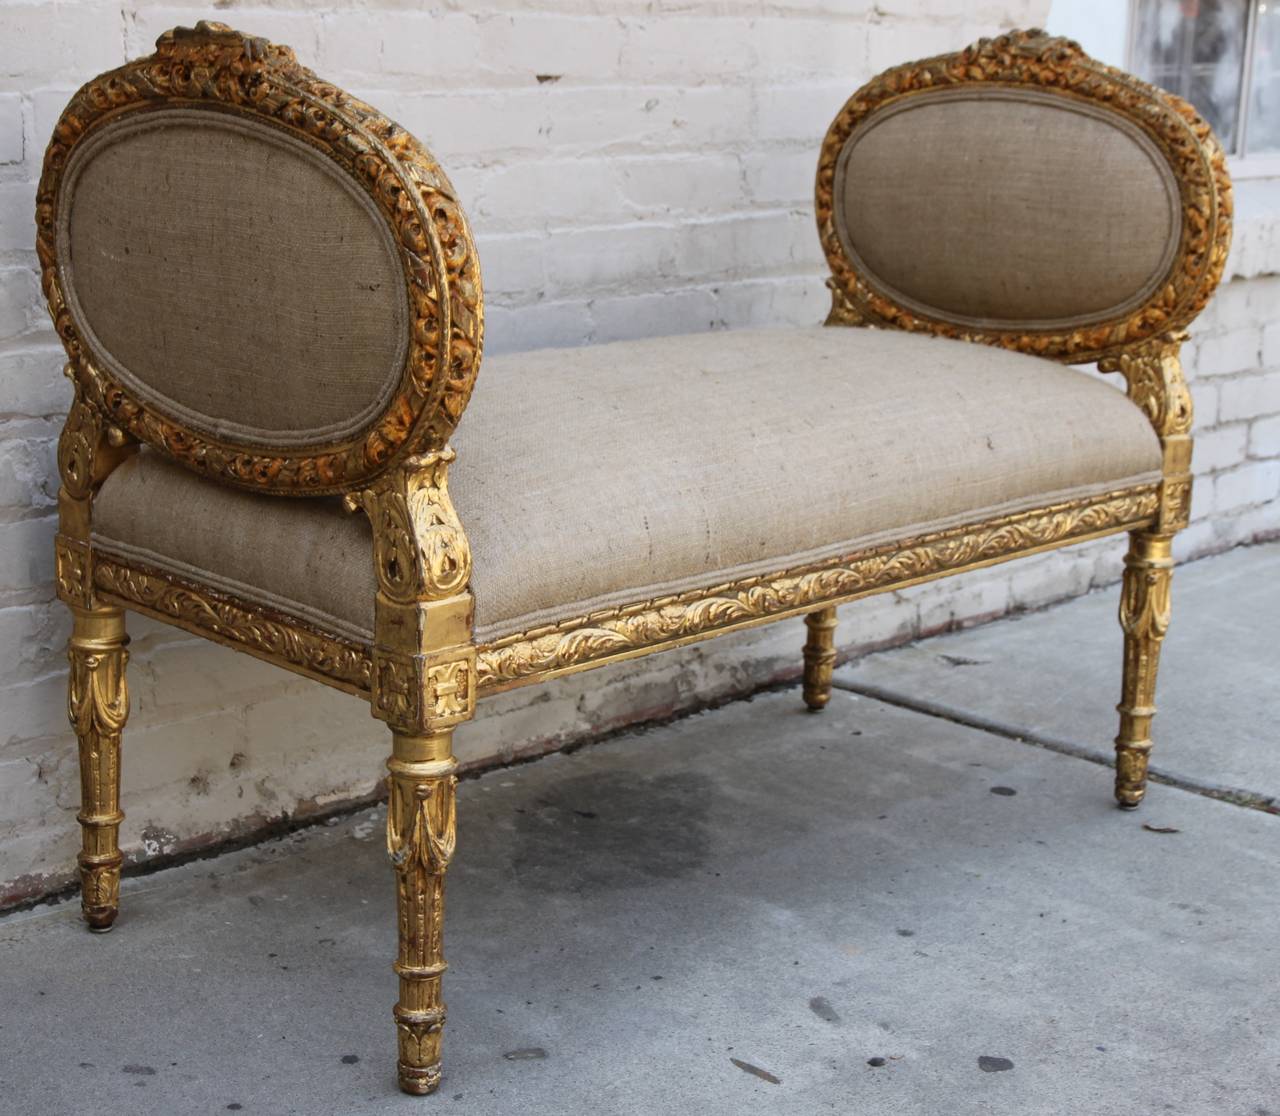 19th century heavily carved giltwood French neoclassical style music bench with oval-shaped sides. The bench is newly upholstered in burlap textile with self cording. The piece stands on four straight fluted legs with carved garlands. Carved detail